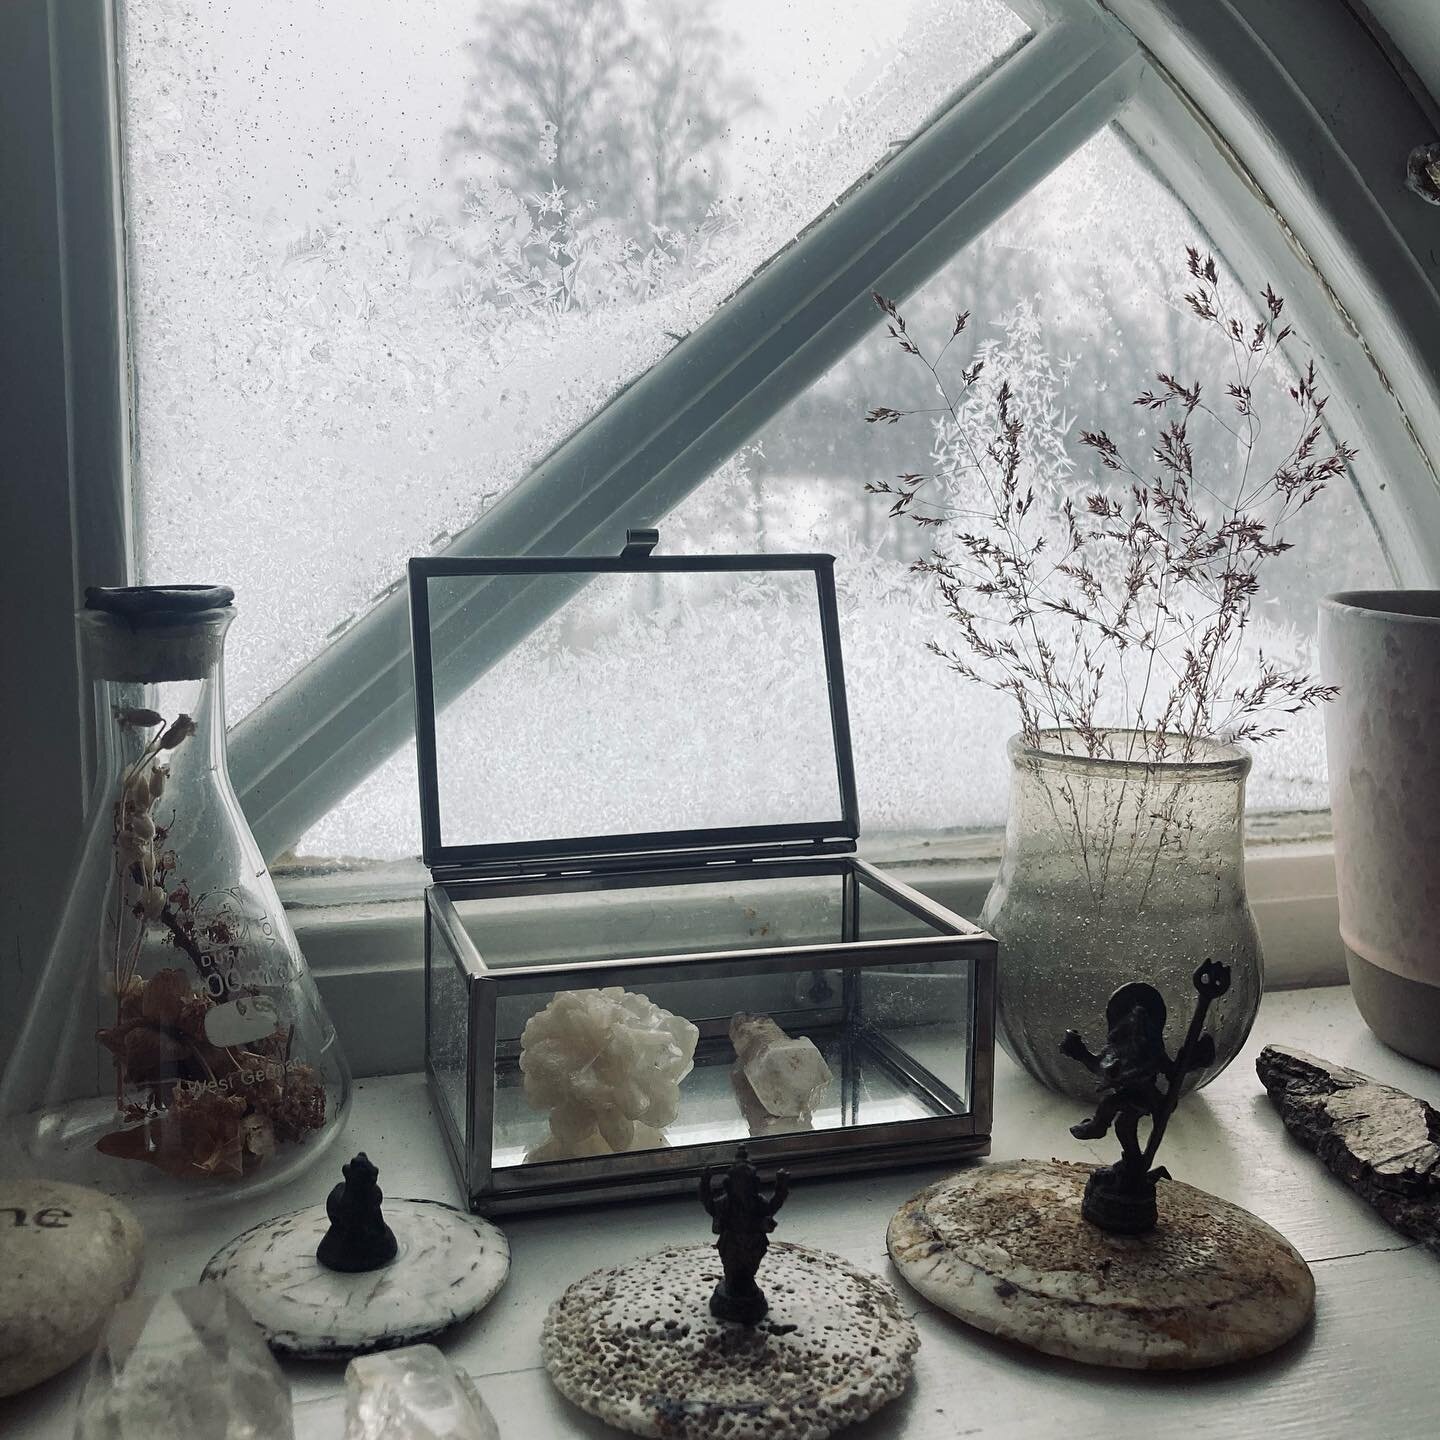 Waking up with frost on the window and the all white world outside. Letting my winter-window-altar hold space for the morning sweet in-bed-contemplations.
__________________________________________________
↠ Susanna Nova - Spirited Living
↠ www.susan